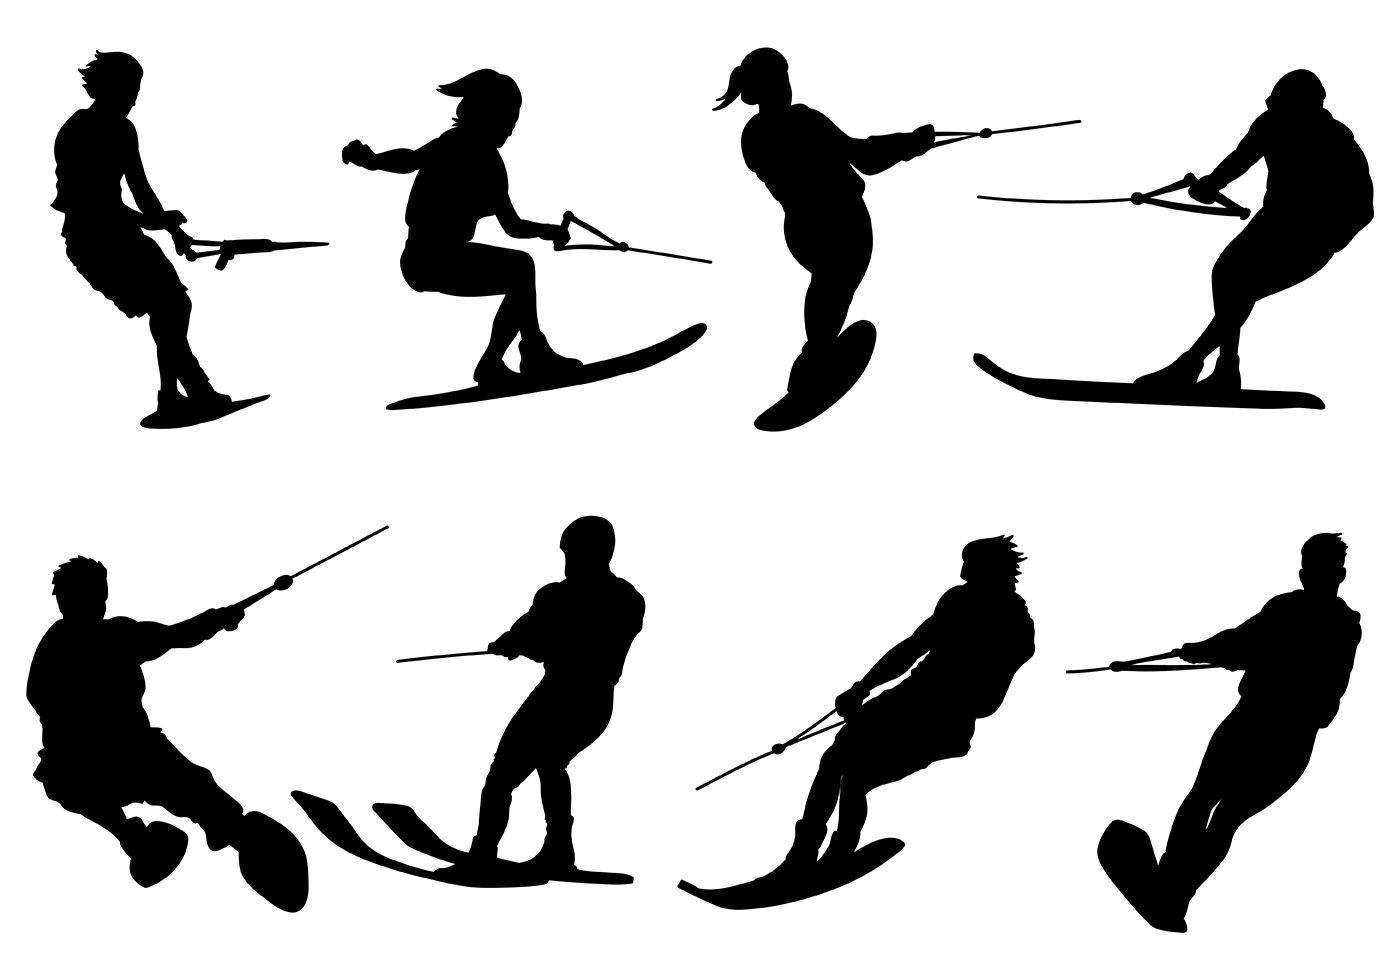 Browse 709 incredible Water Skiing vectors, icons, clipart graphics, and ba...